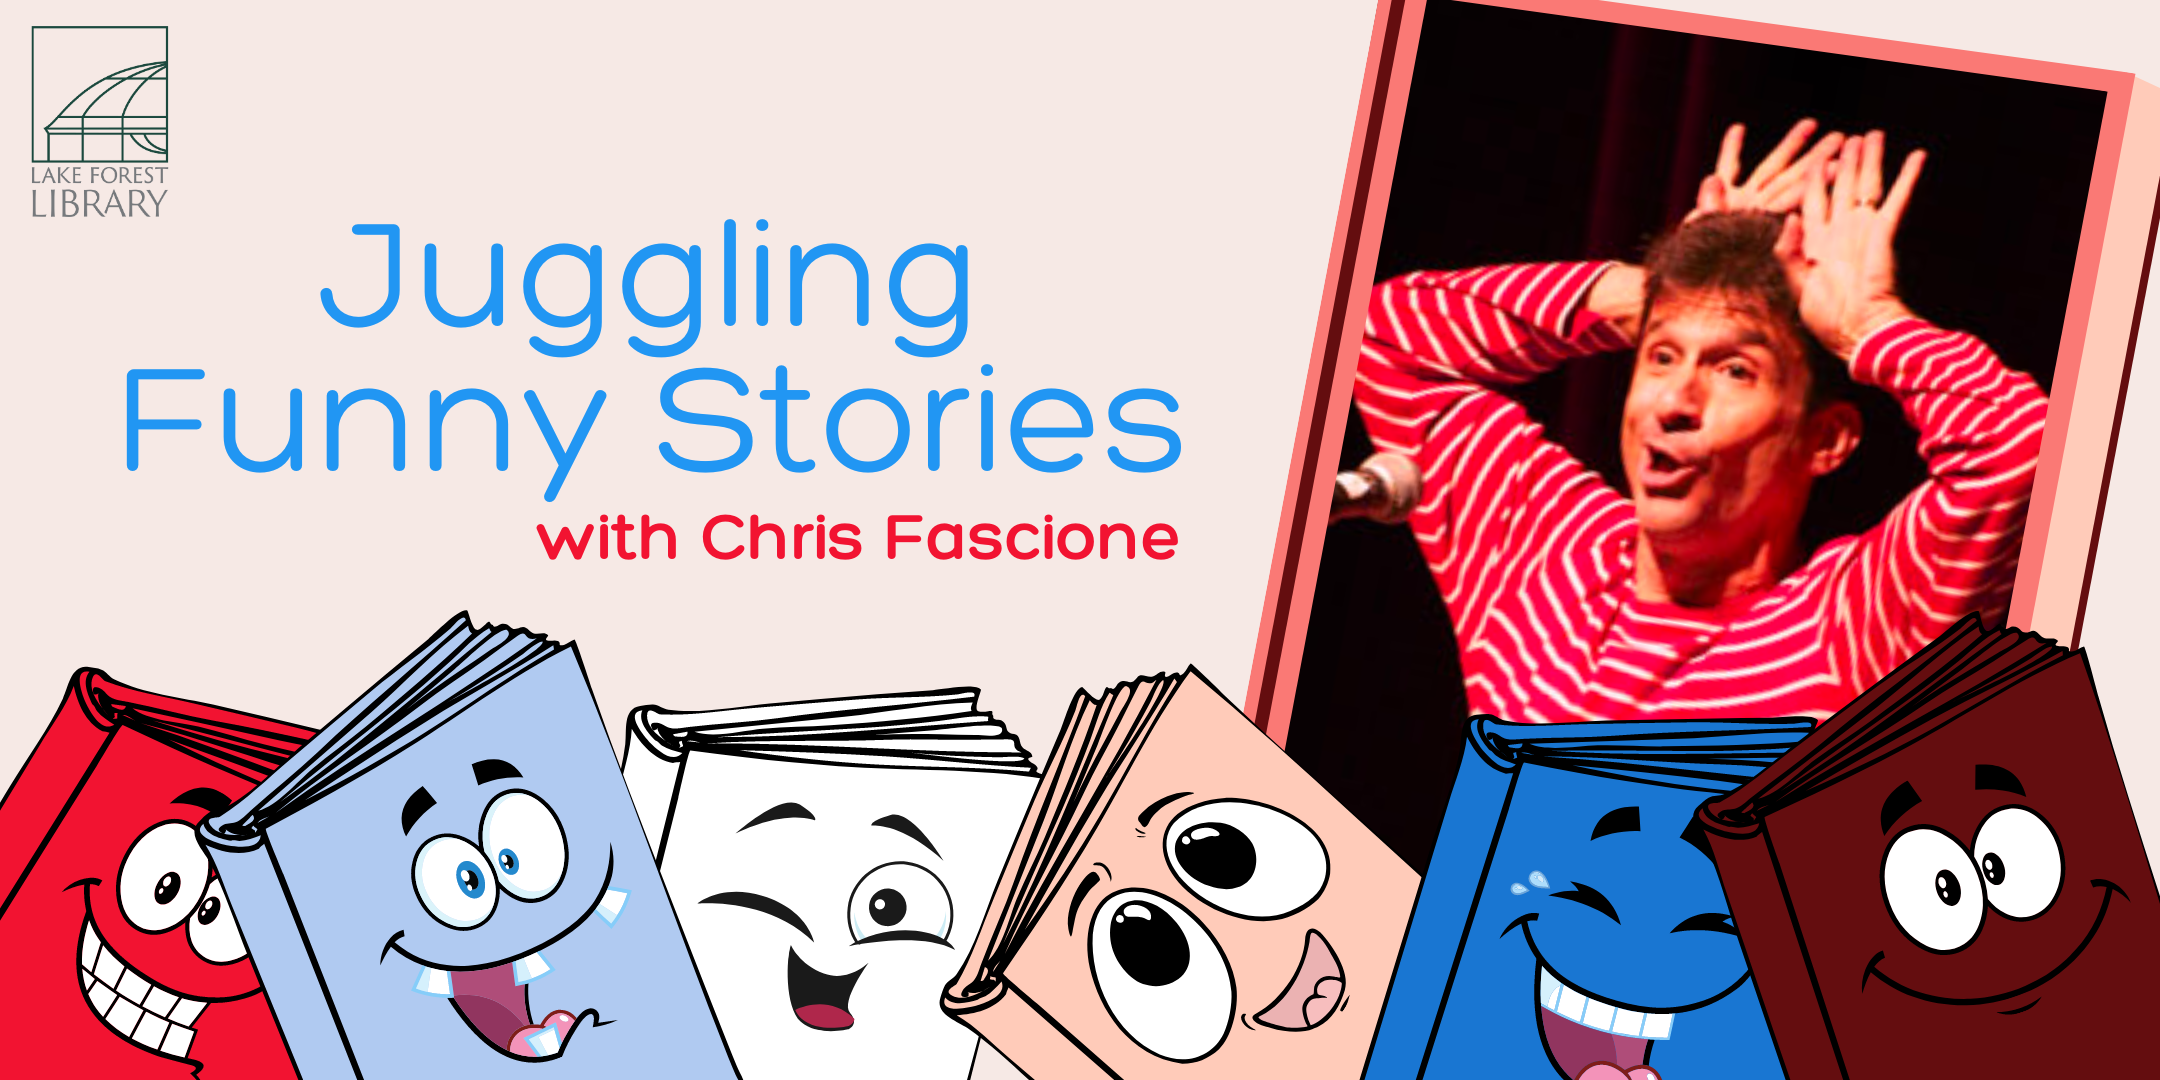 image of "Juggling Funny Stories with Chris Fascione"